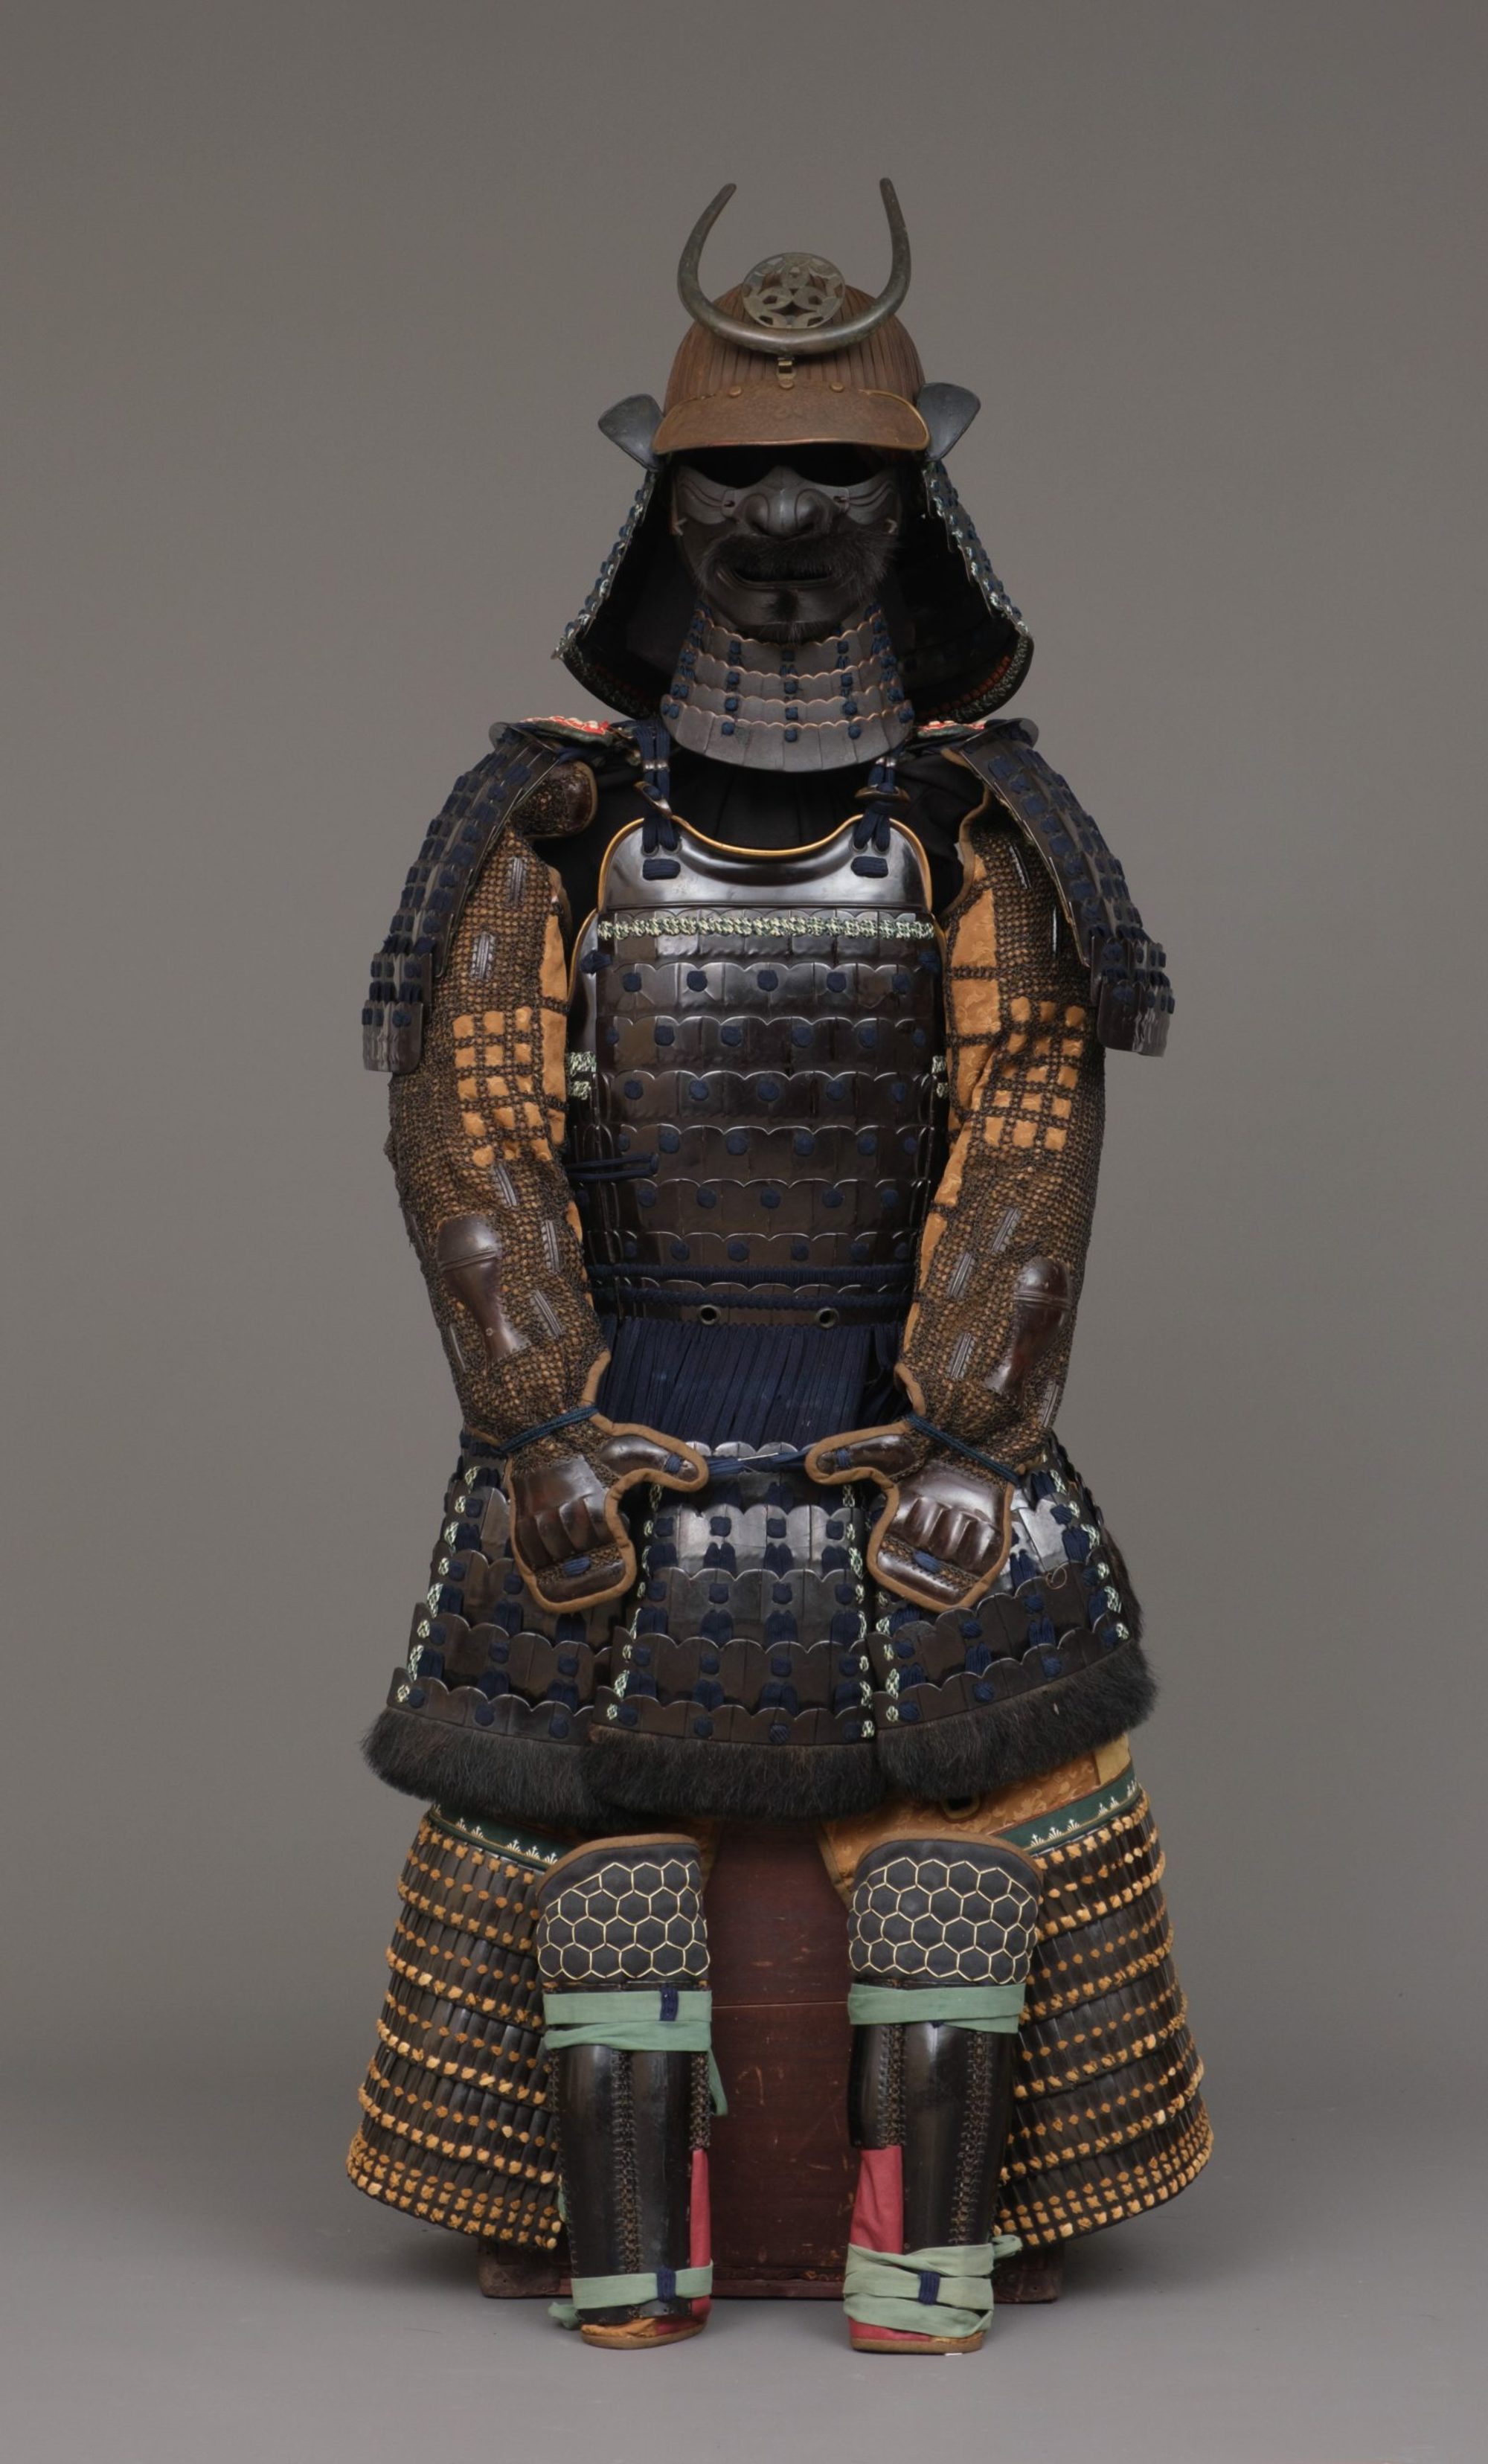 A JAPANESE SUIT OF ARMOUR (YOROI), FIRST HALF 19TH CENTURY (LATE EDO PERIOD) - Image 2 of 4